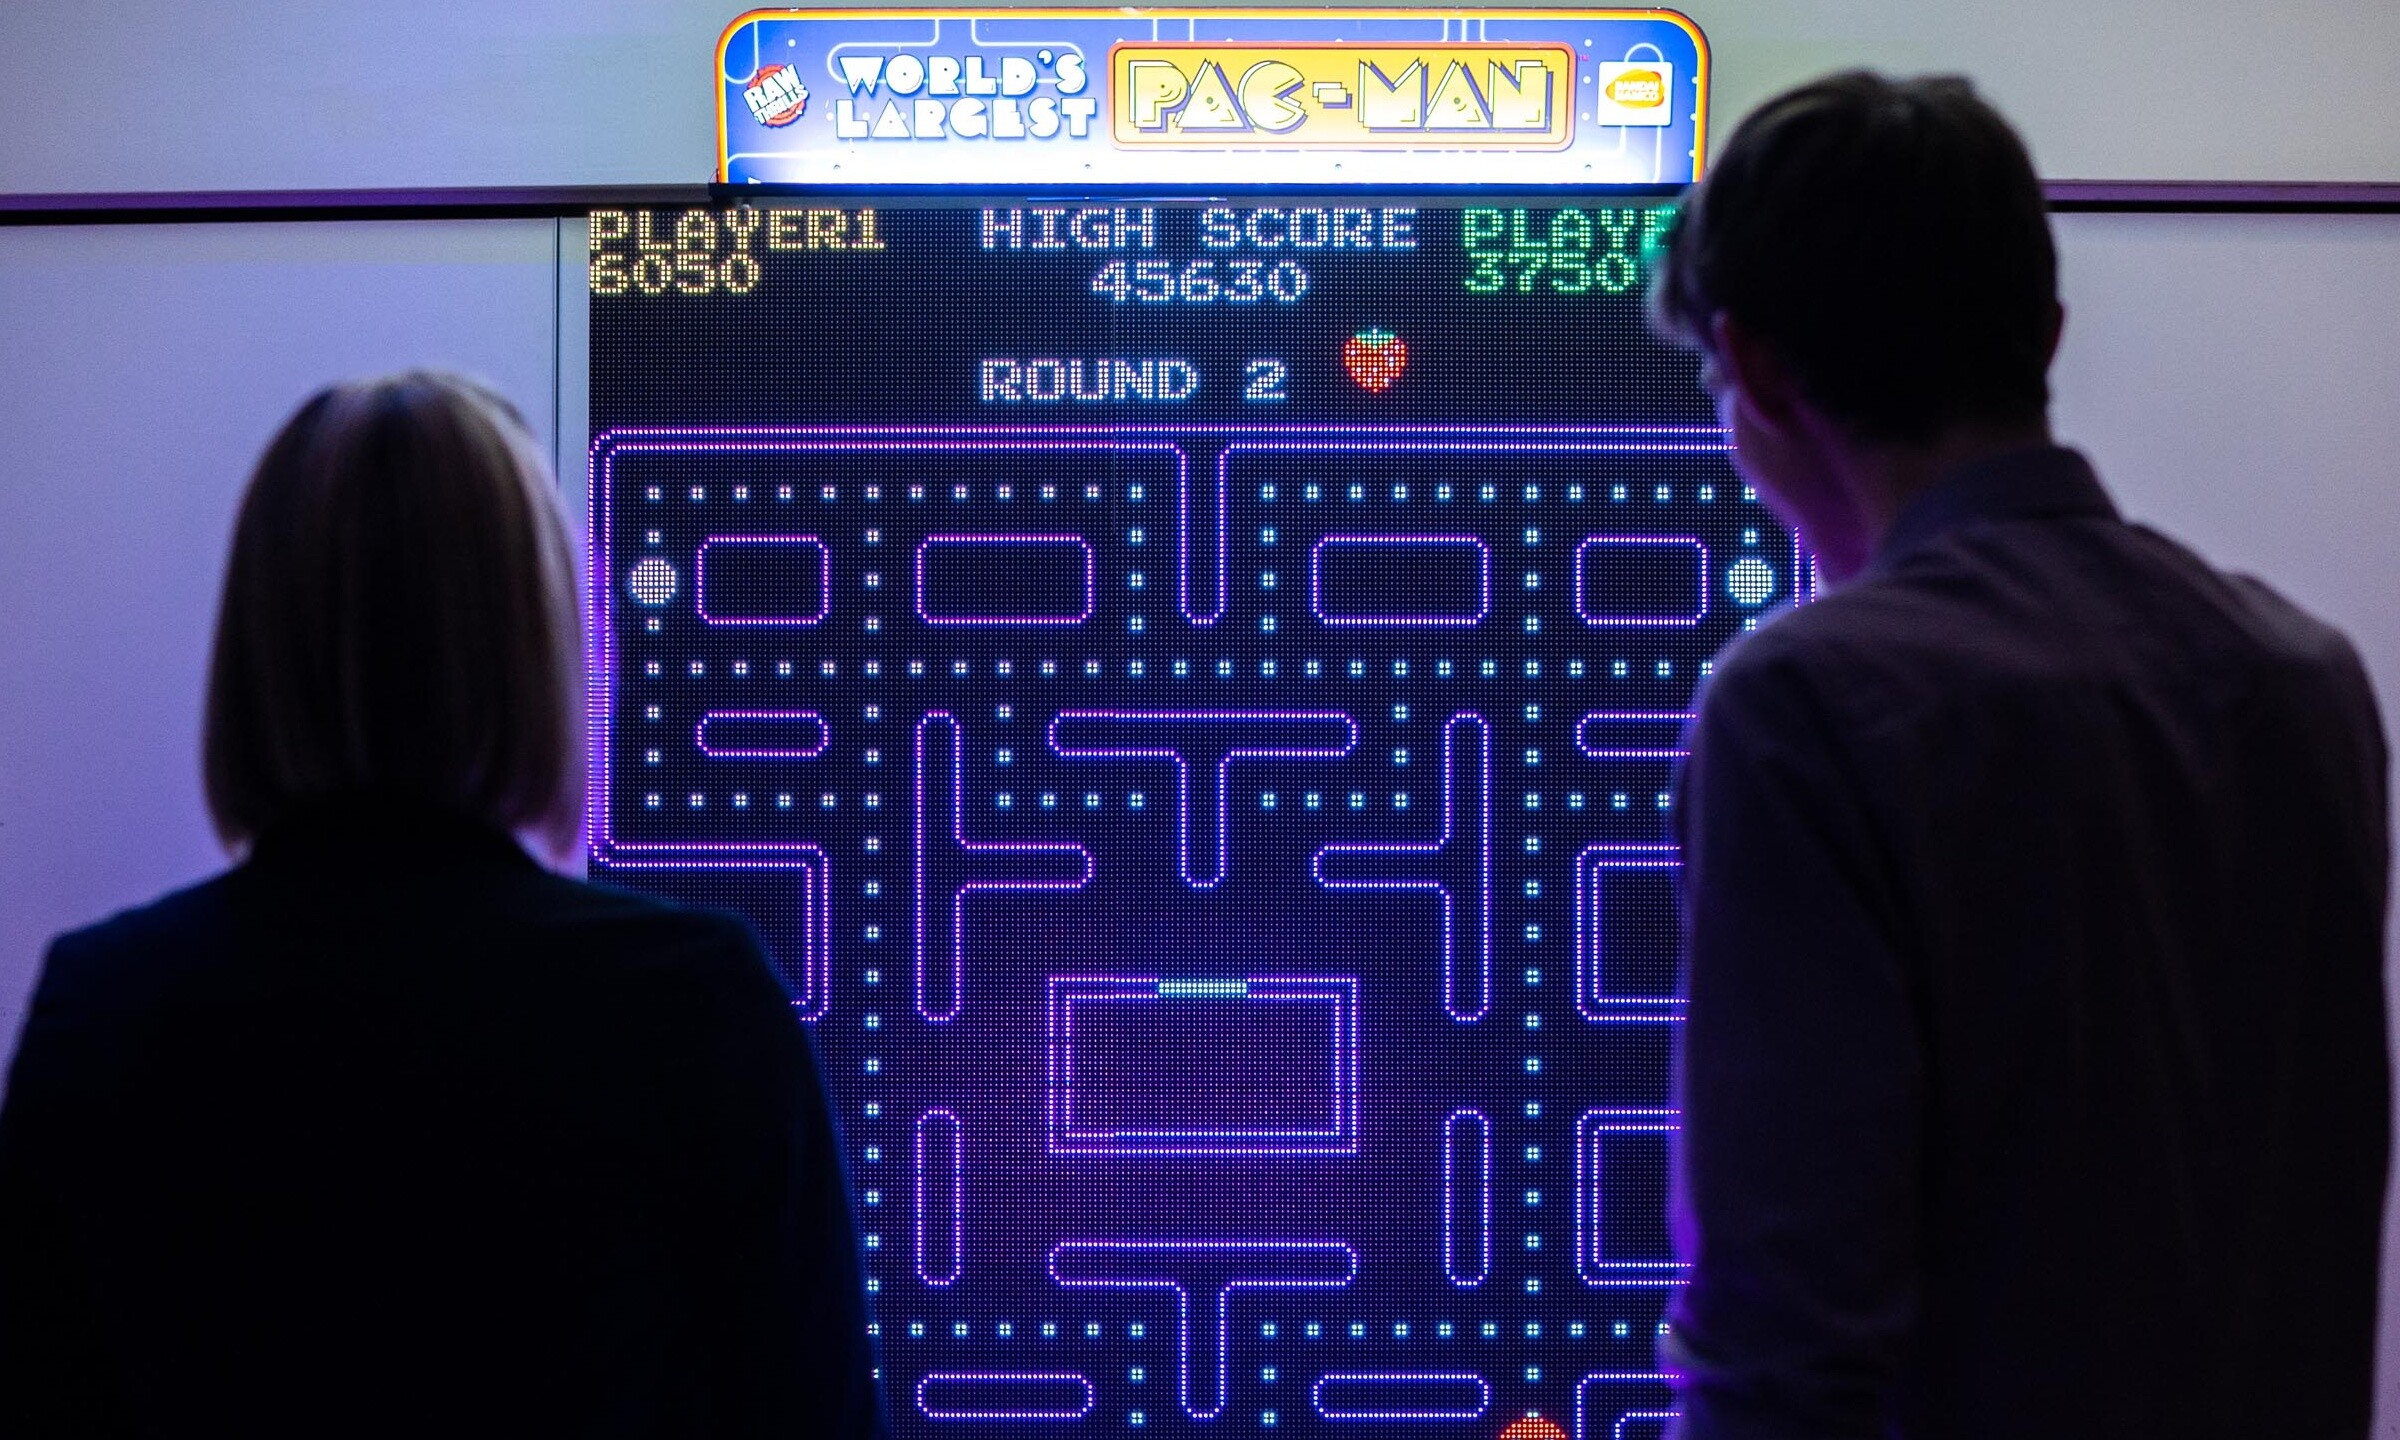 Giant Pacman 5